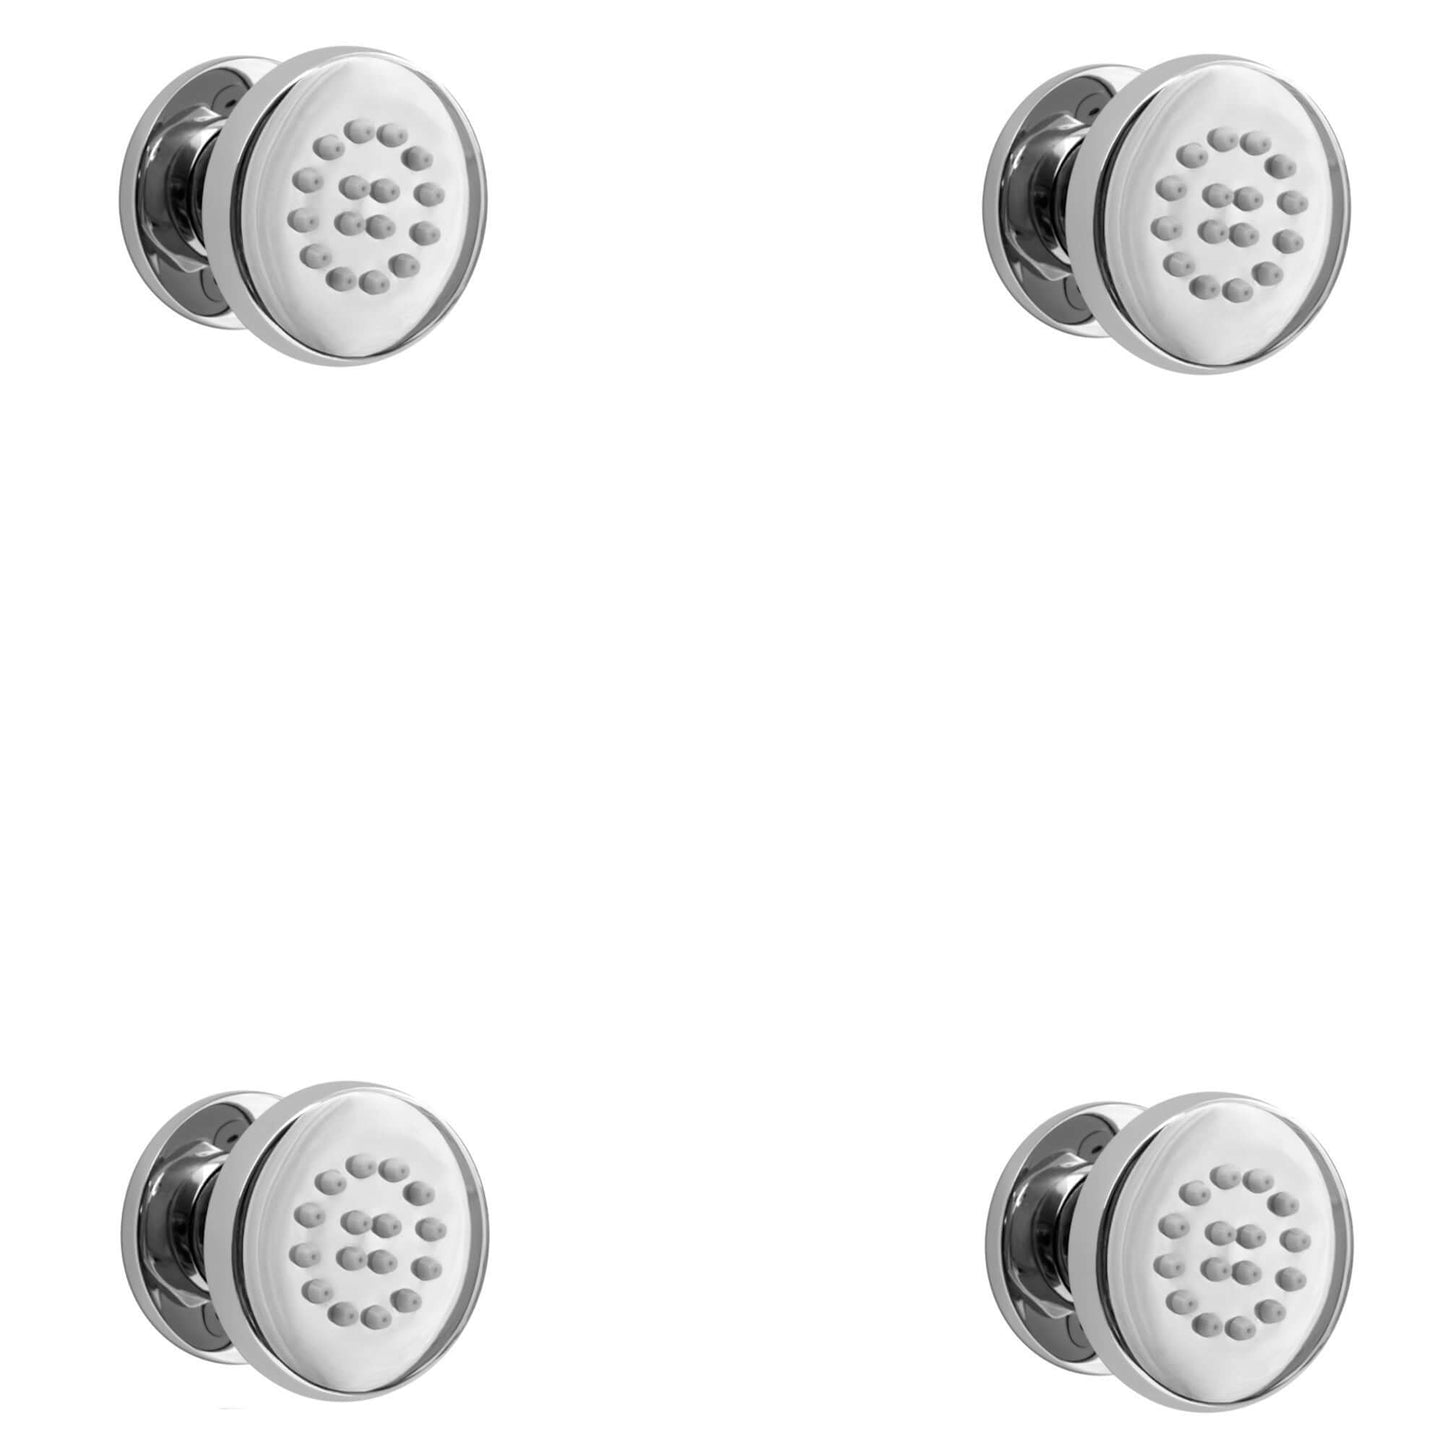 Venice Contemporary Round Concealed Thermostatic Shower Set Incl. Triple Diverter Valve, Wall Fixed 8" Shower Head, Slider Rail Kit, 4 Body Jets - Chrome (3 Outlet)